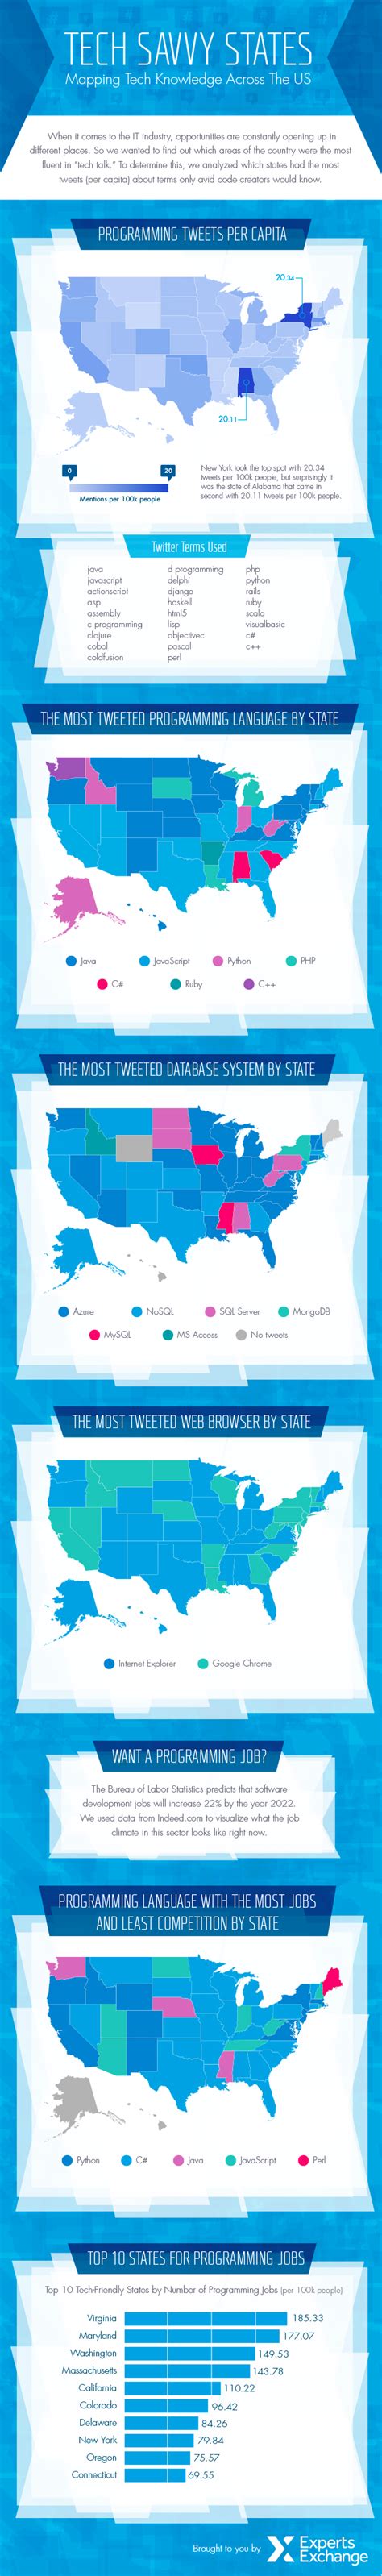 The Most Tech Savvy States In America According To Twitter